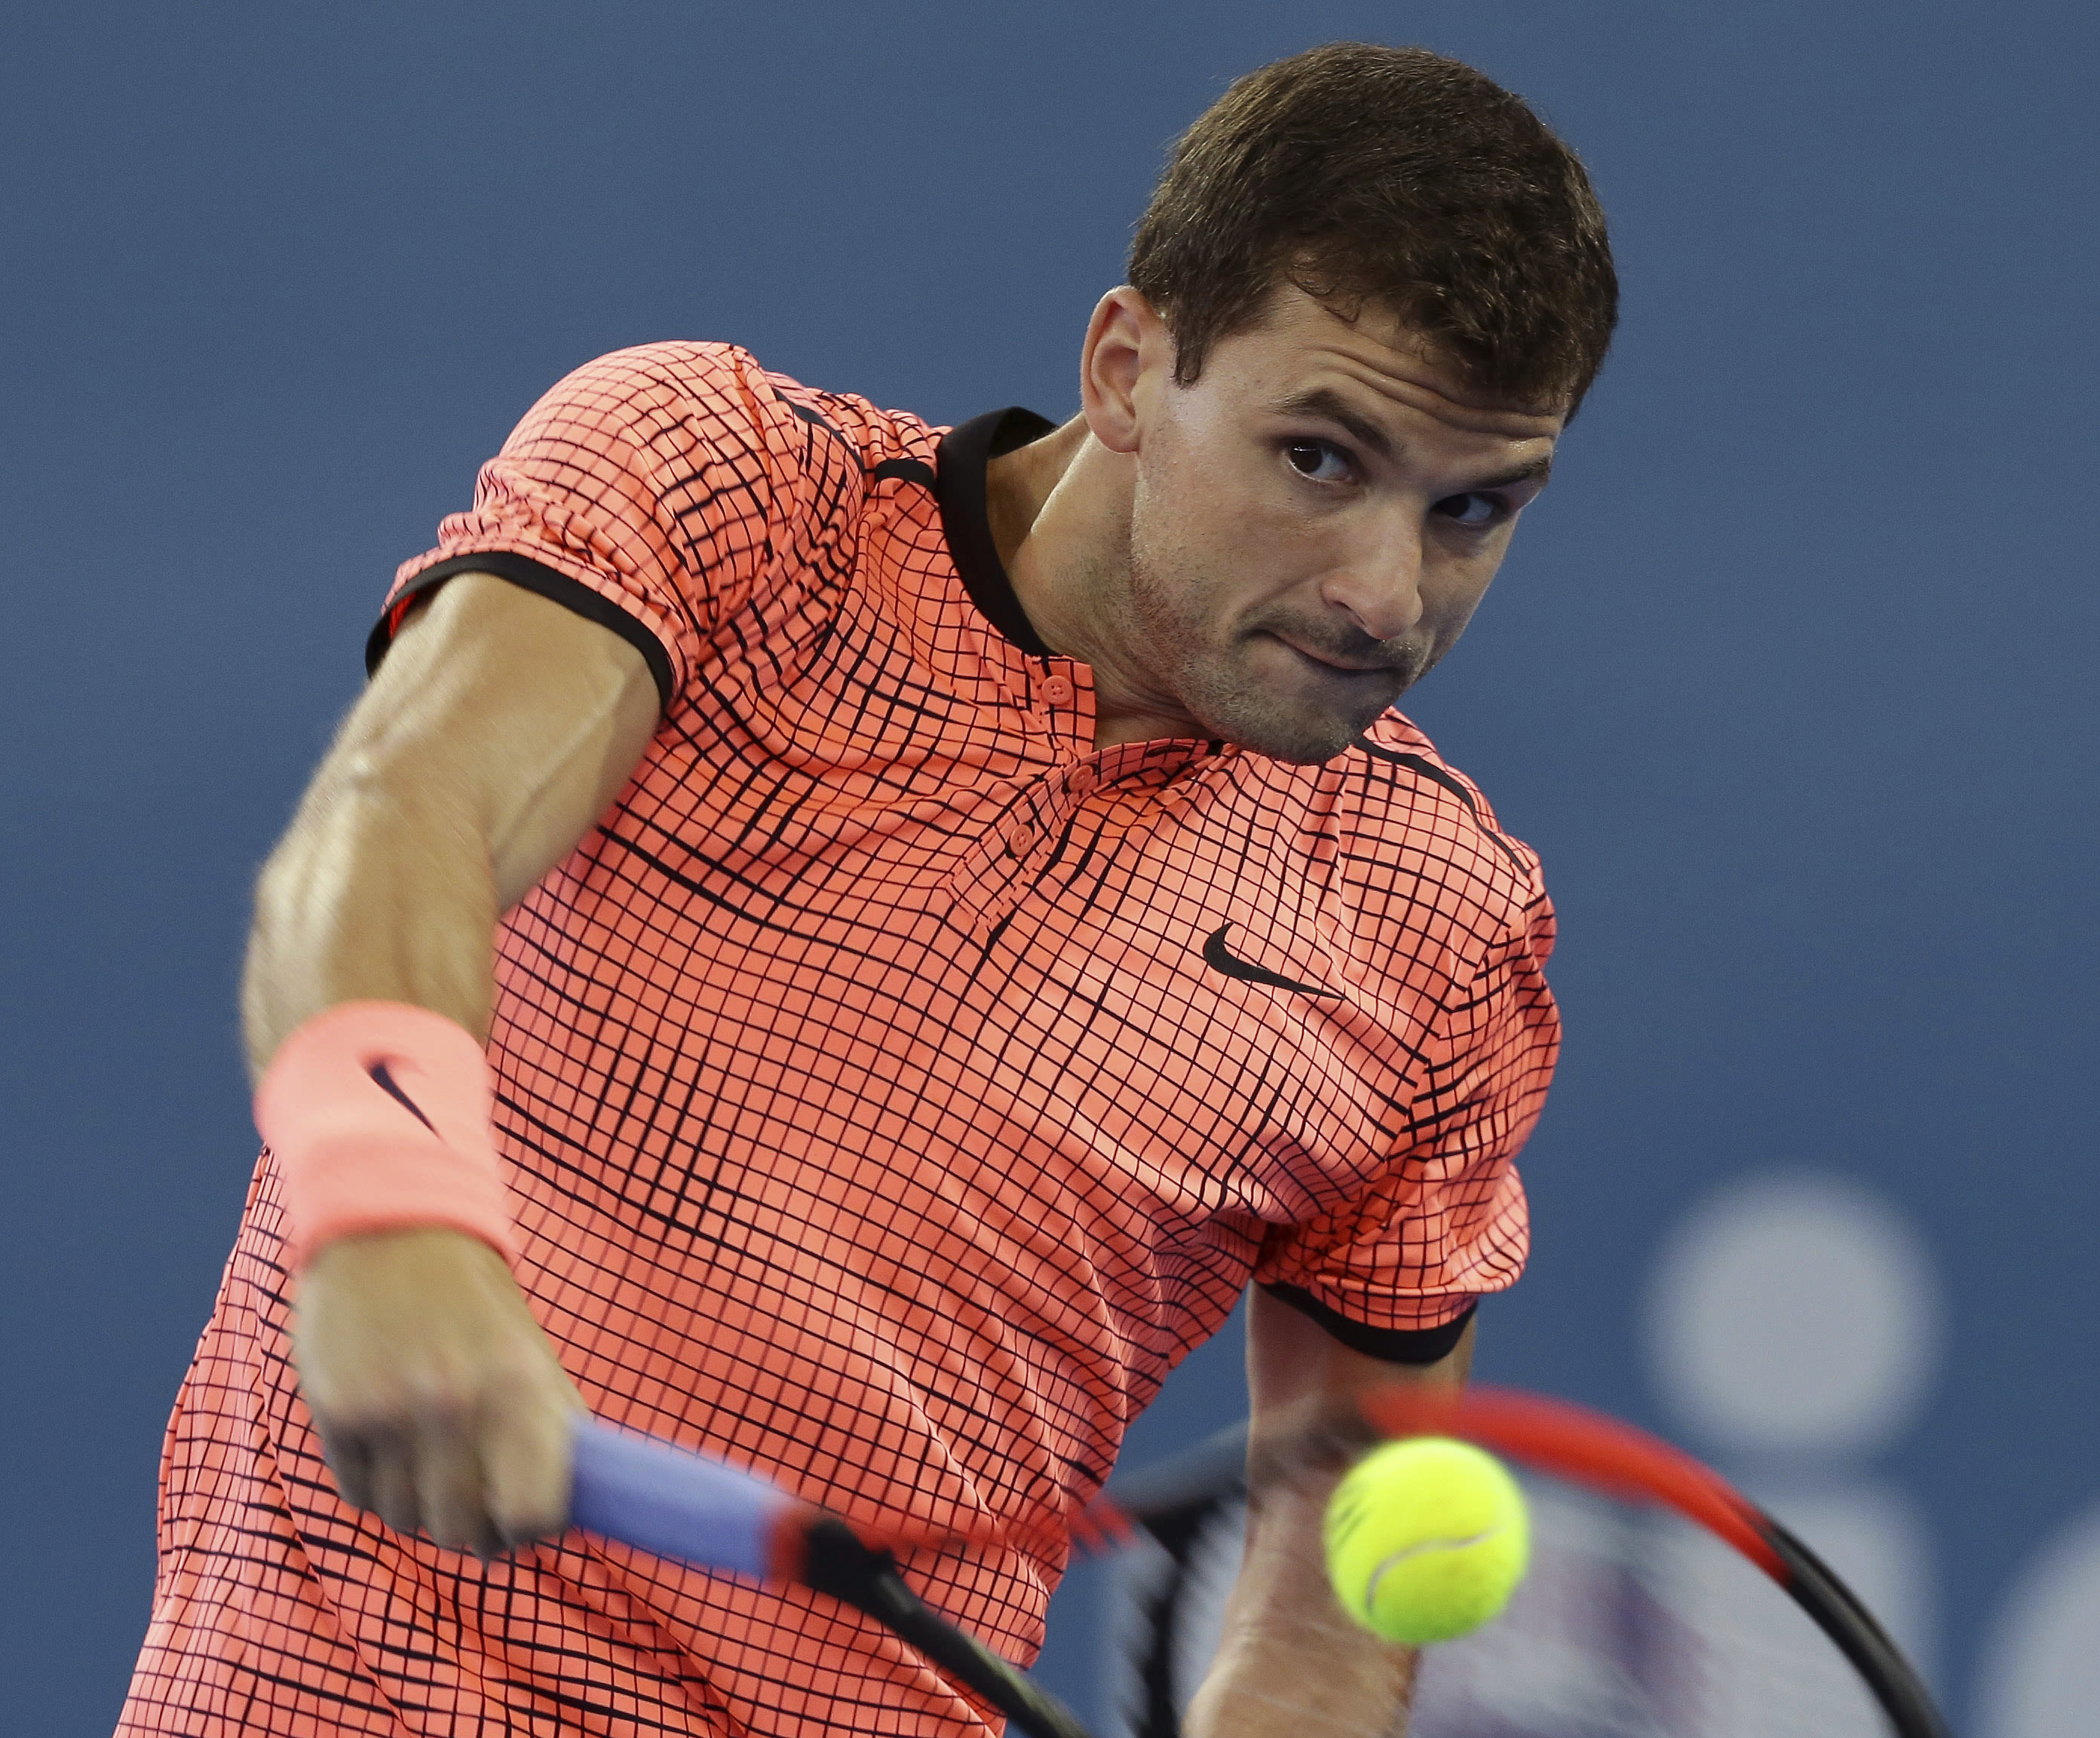 Dimitrov out to prove he can keep winning matches, 'beat top guys